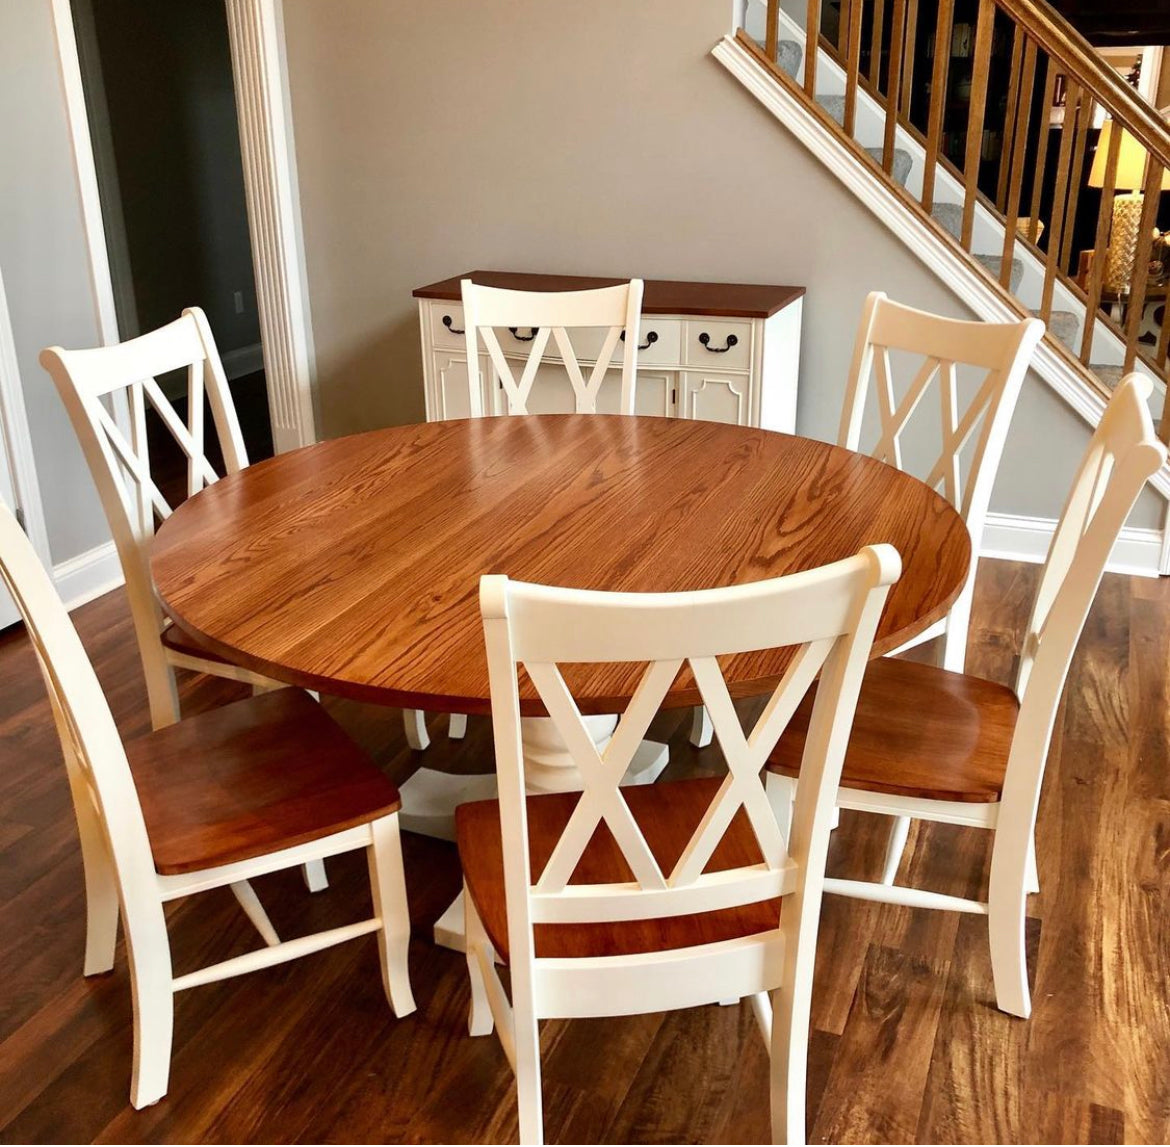 Pictured with a 60" W Red Oak table stained Cherry with a white painted base. Pictured with 6 Double Cross Back Chairs.